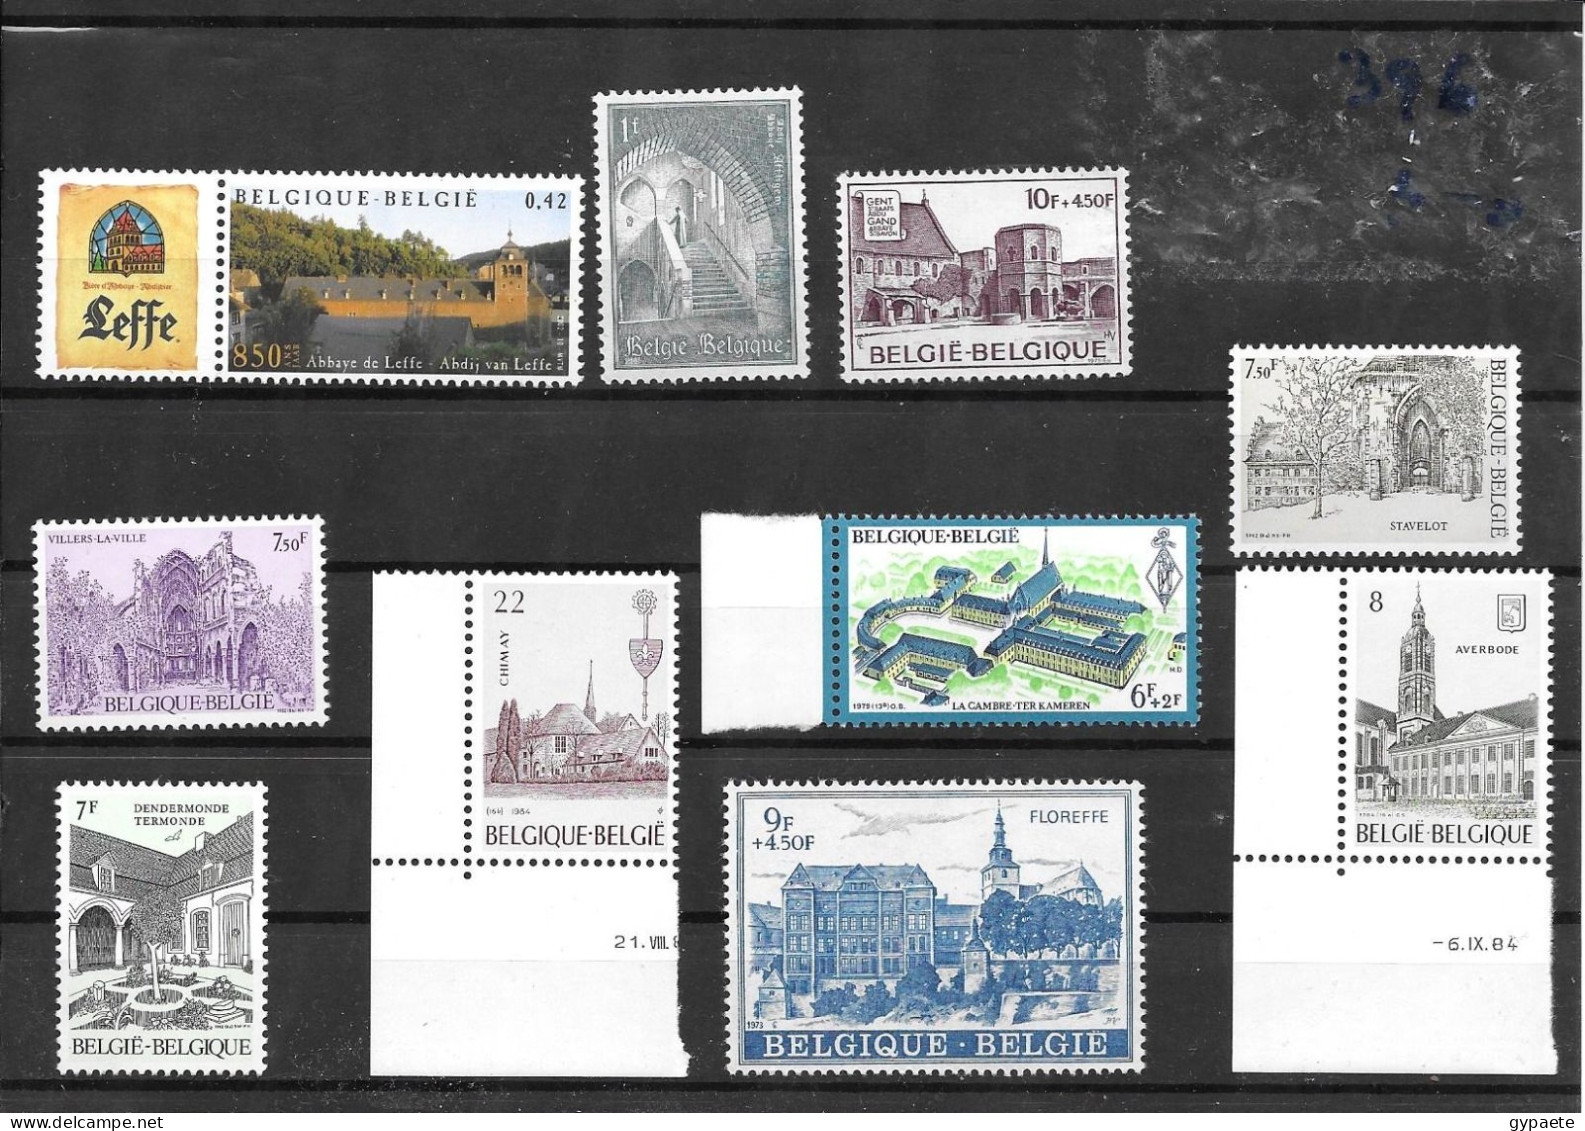 Abbayes Et Monastères - 36 Timbres / Abbeys And Monasteries - 36 Stamps - MNH - Abbeys & Monasteries